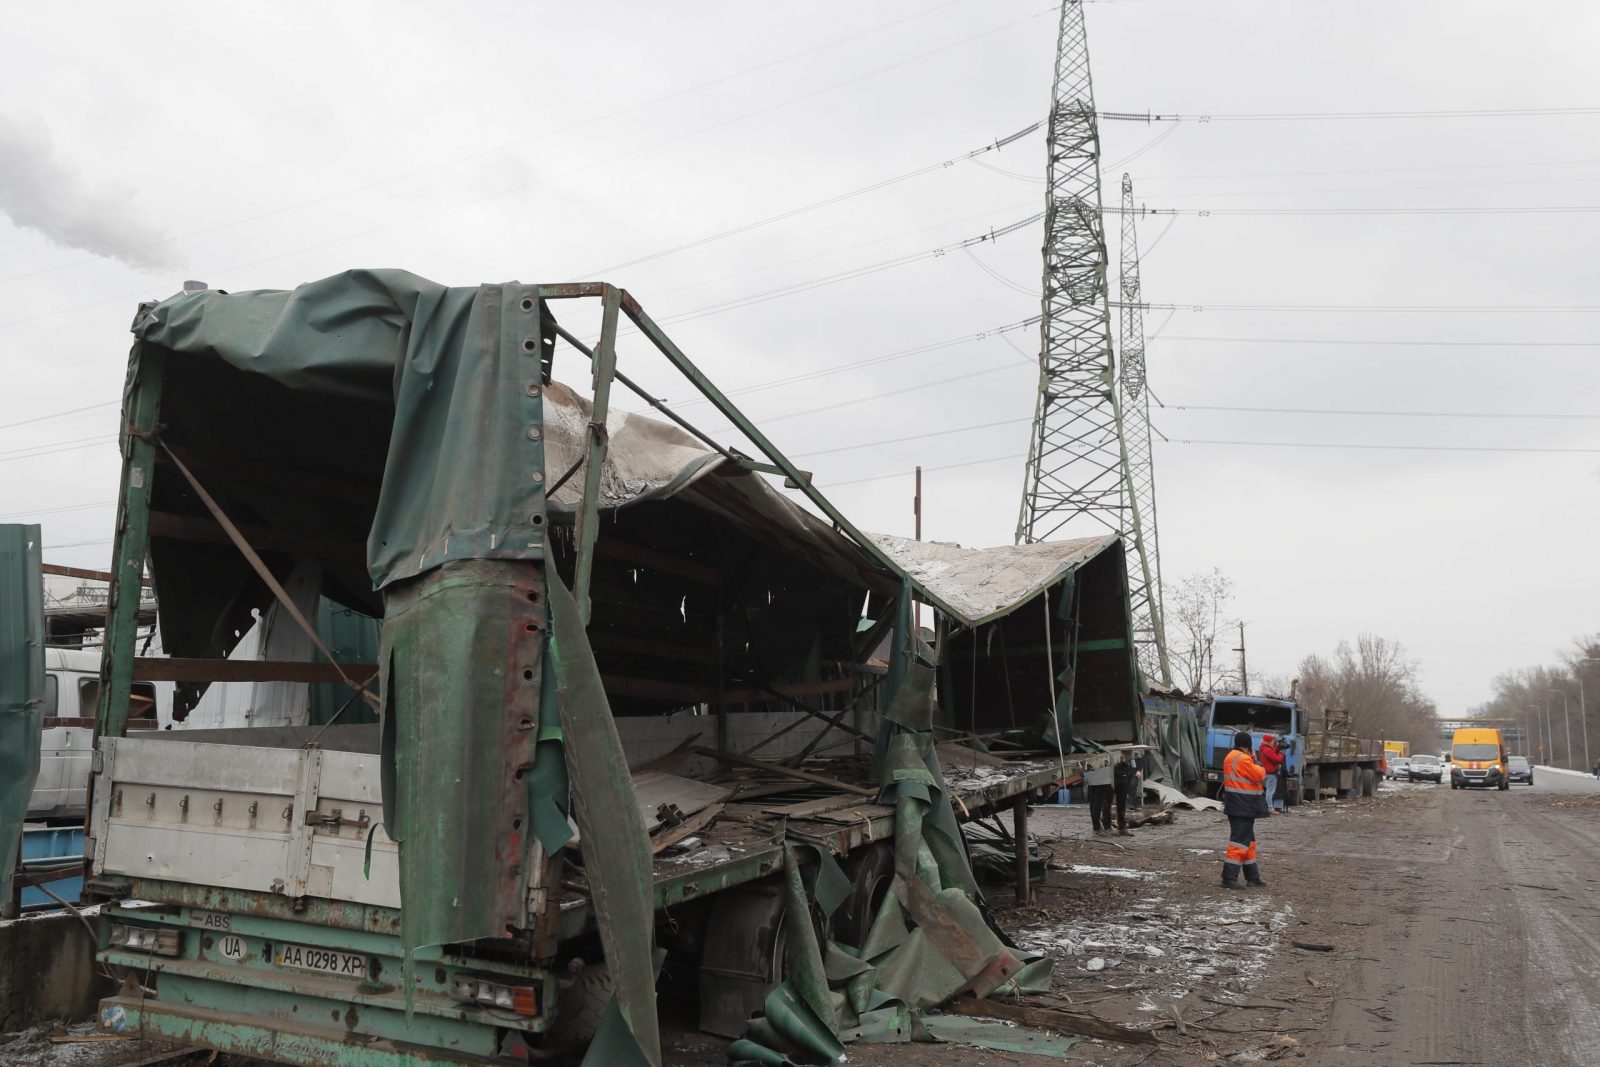 epa10431280 A damaged truck on the site after a misssile strike hit Kiyv, Ukraine, 26 January 2023. Russian missile strikes hit various energy infrastructure targets across Ukraine. According to Ukraine's energy minister Halushchenko, emergency power outages have been introduced and the most difficult situation were currently observed in Kyiv, Odesa and Vinnytsia oblasts.  EPA/SERGEY DOLZHENKO